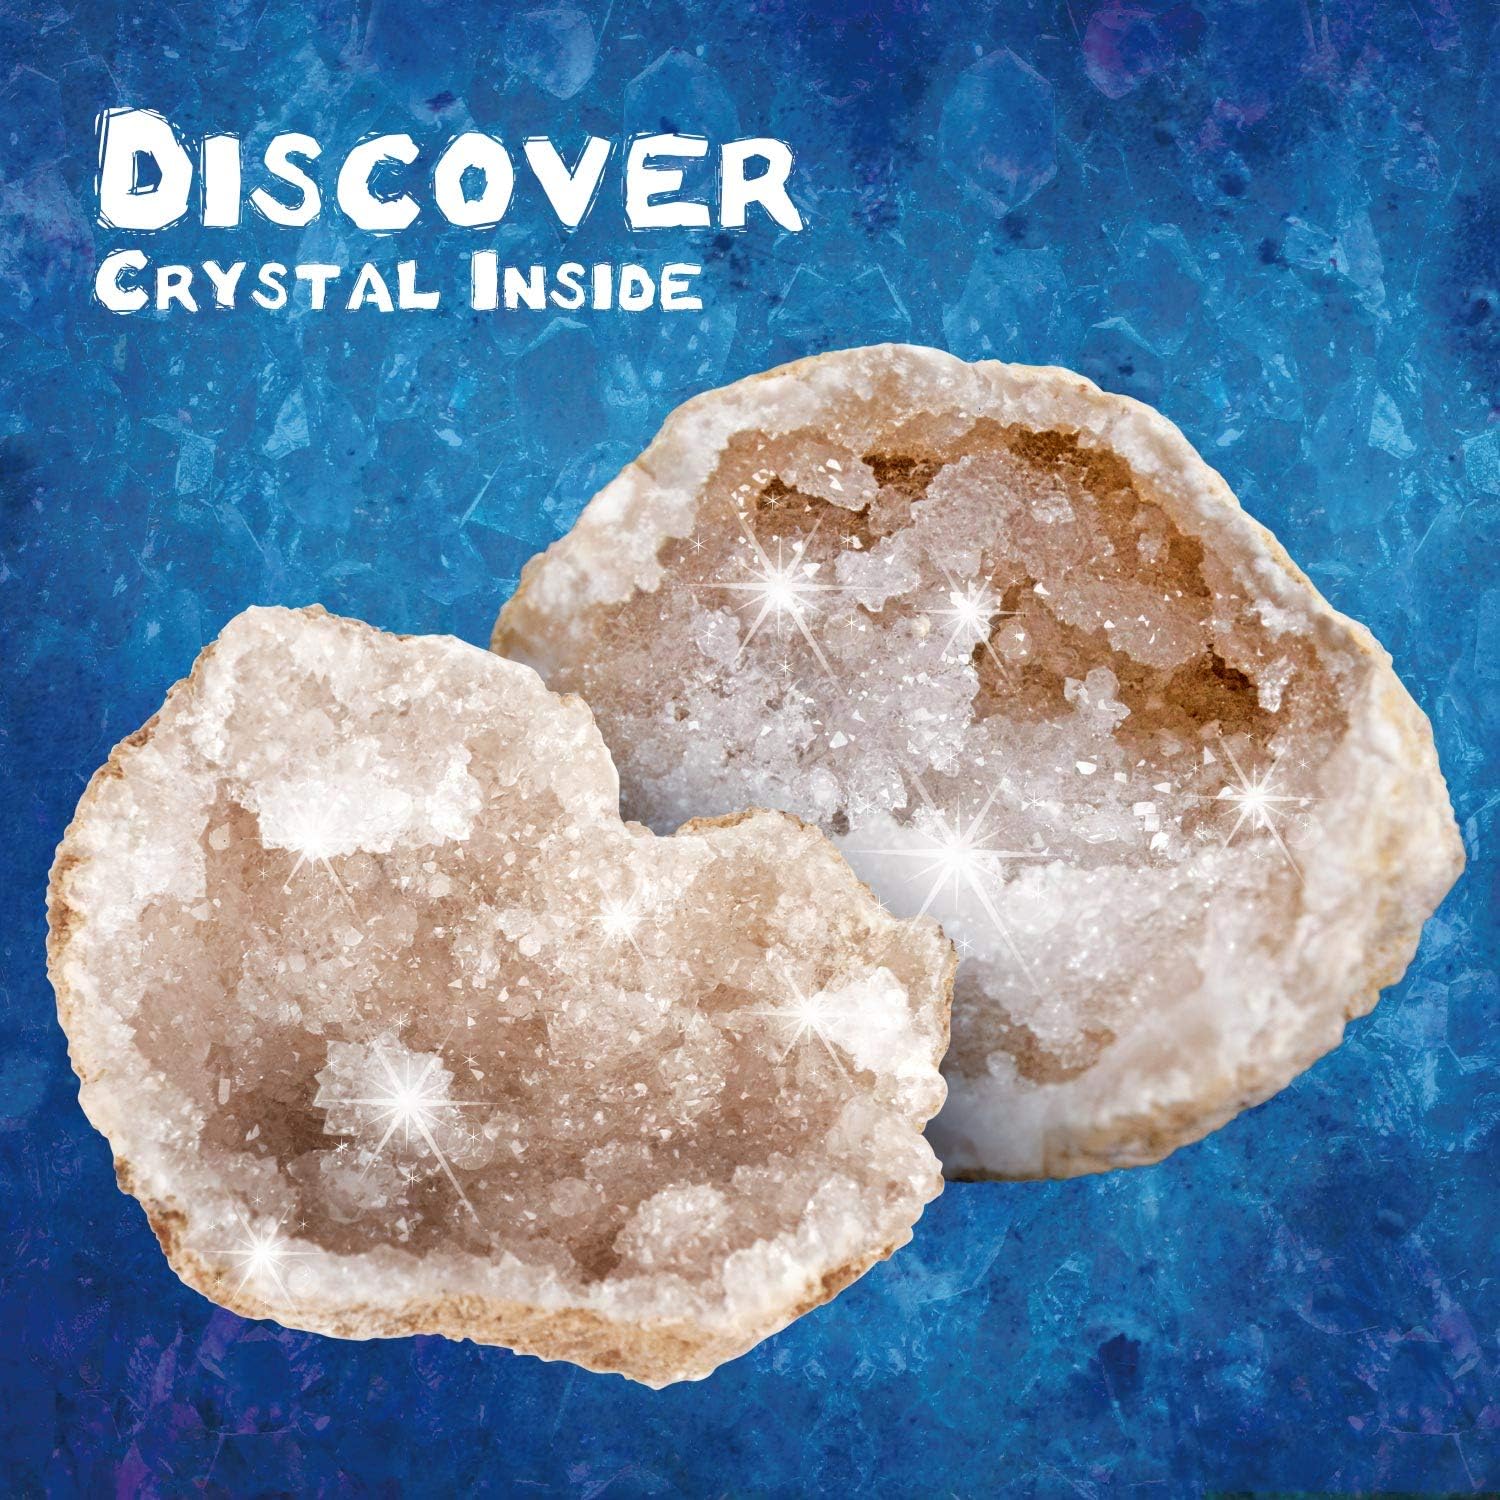 Break Open 10 Premium Geodes – Includes Goggles, Detailed Learning Guide